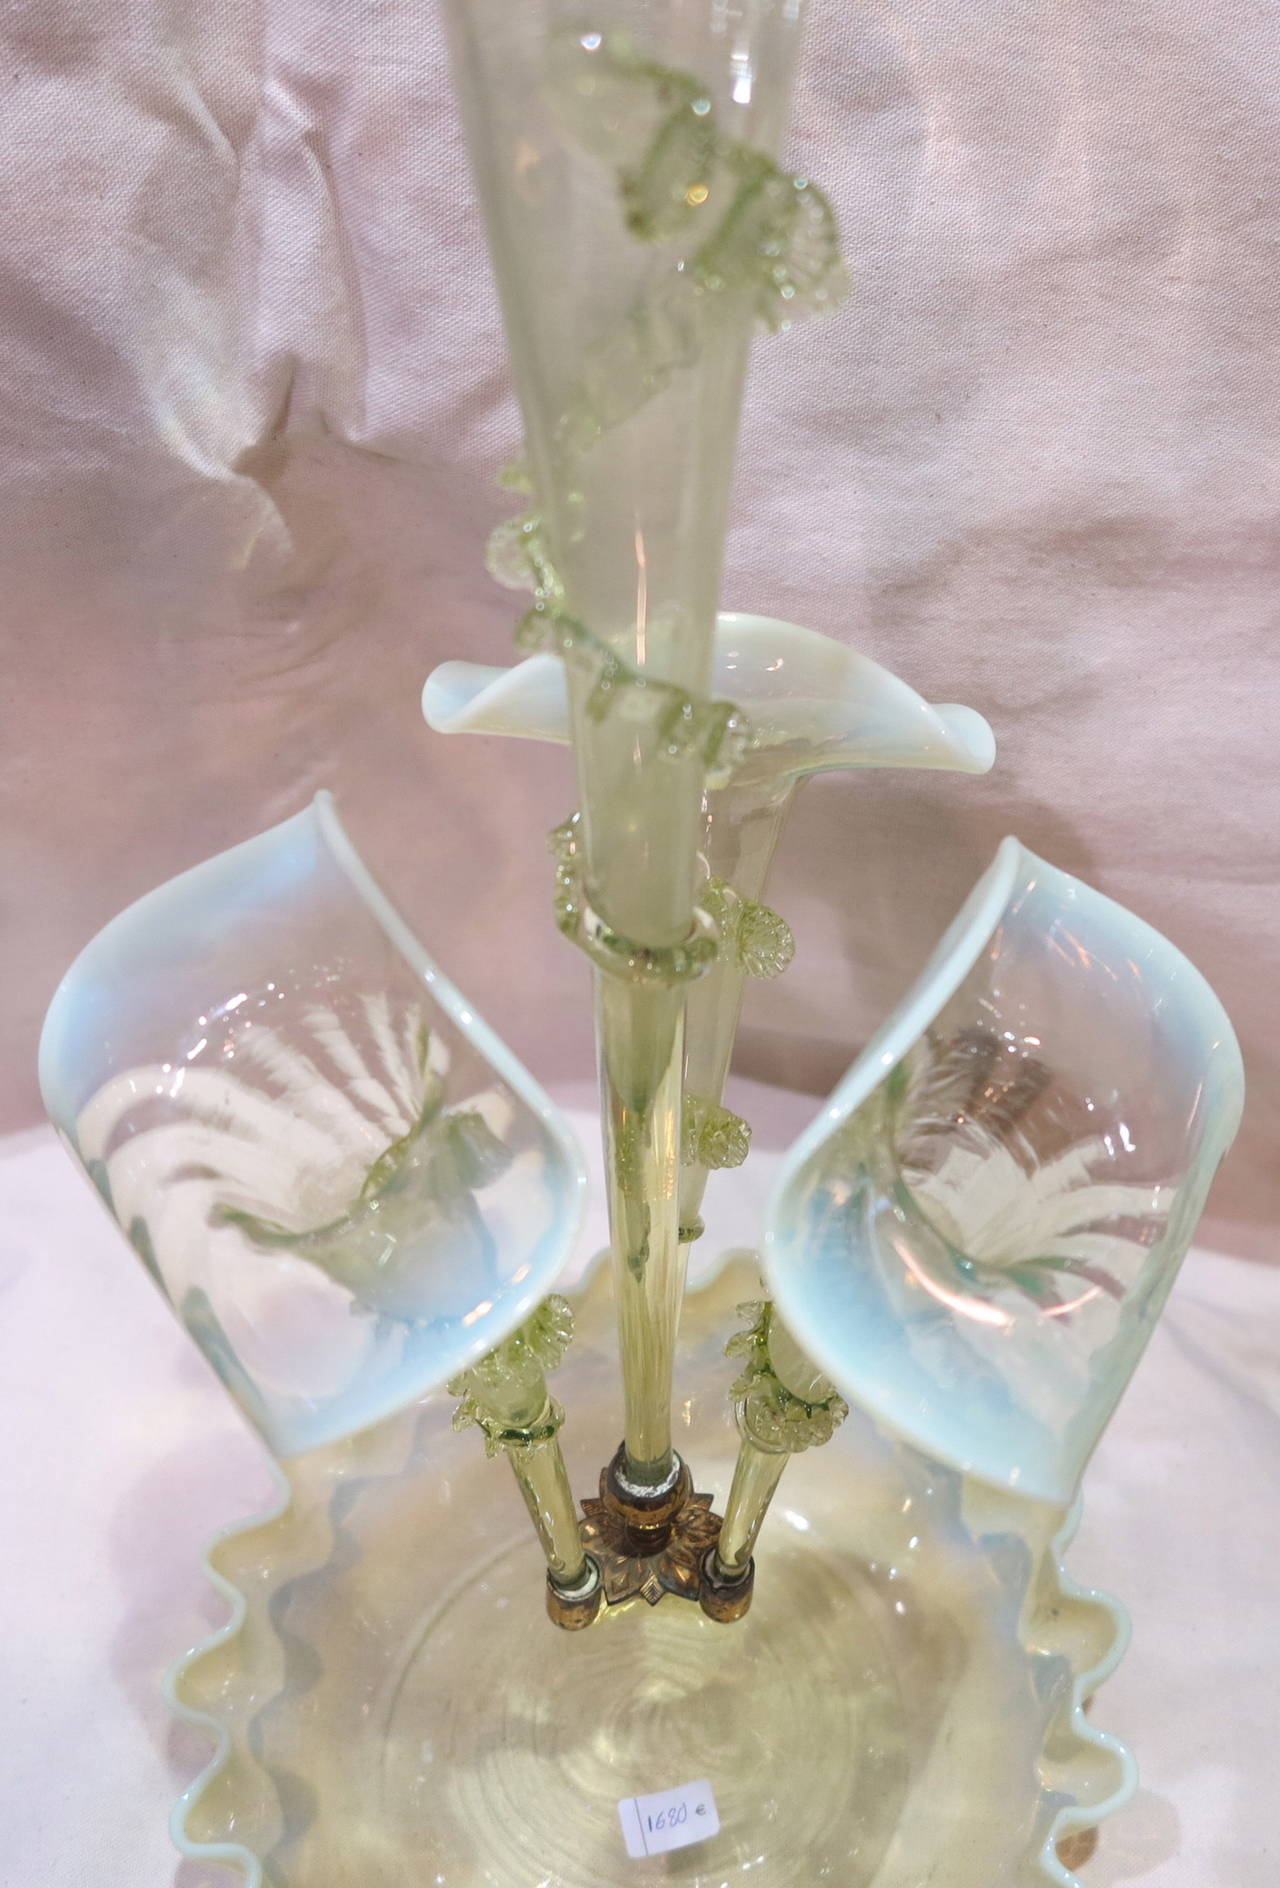 Outstanding Art Nouveau 19th Century Epergne on Plateau For Sale 2